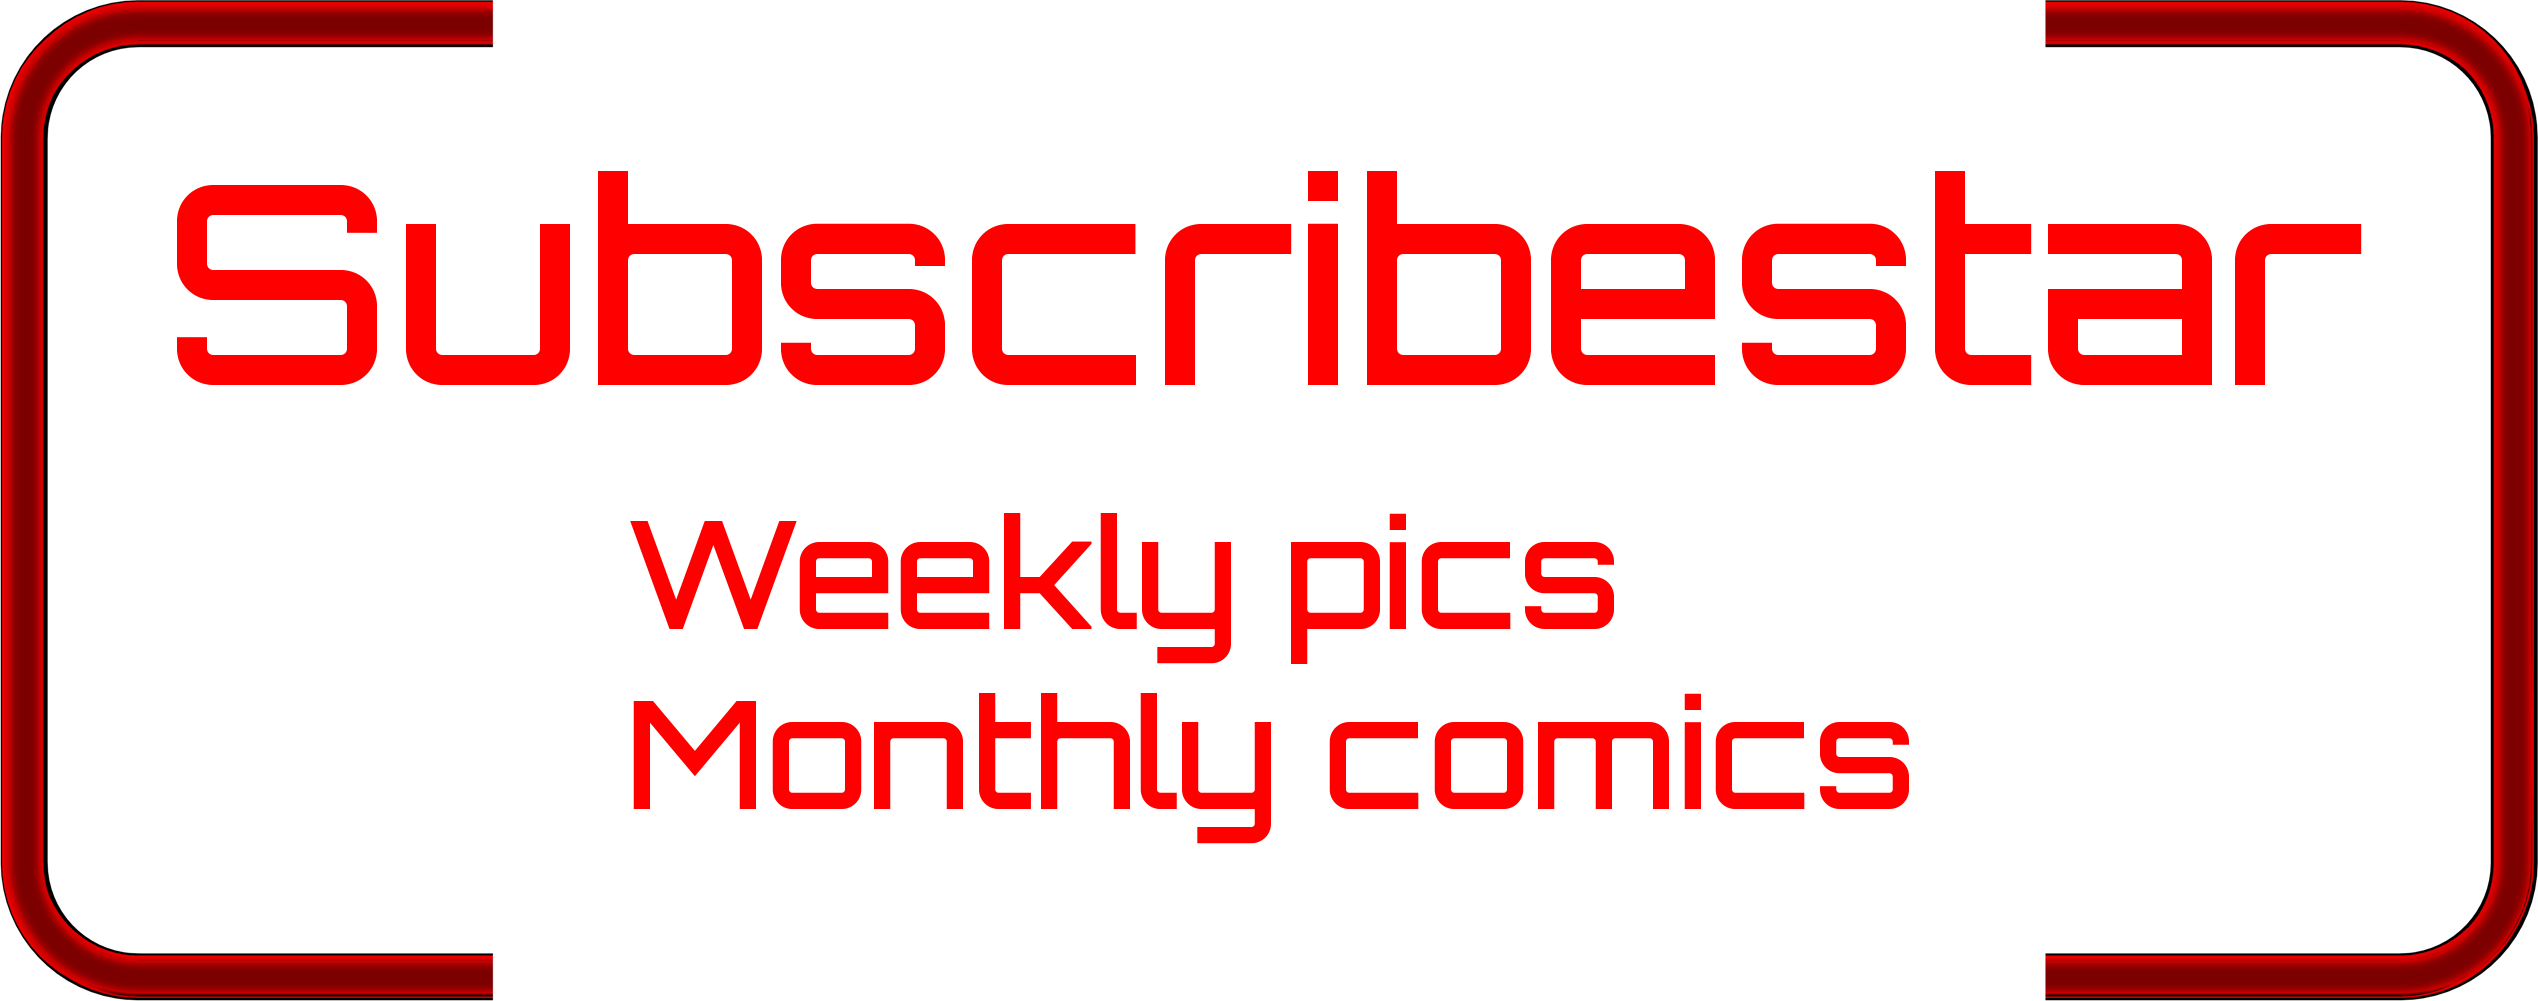 Weekly pics and monthly comics.